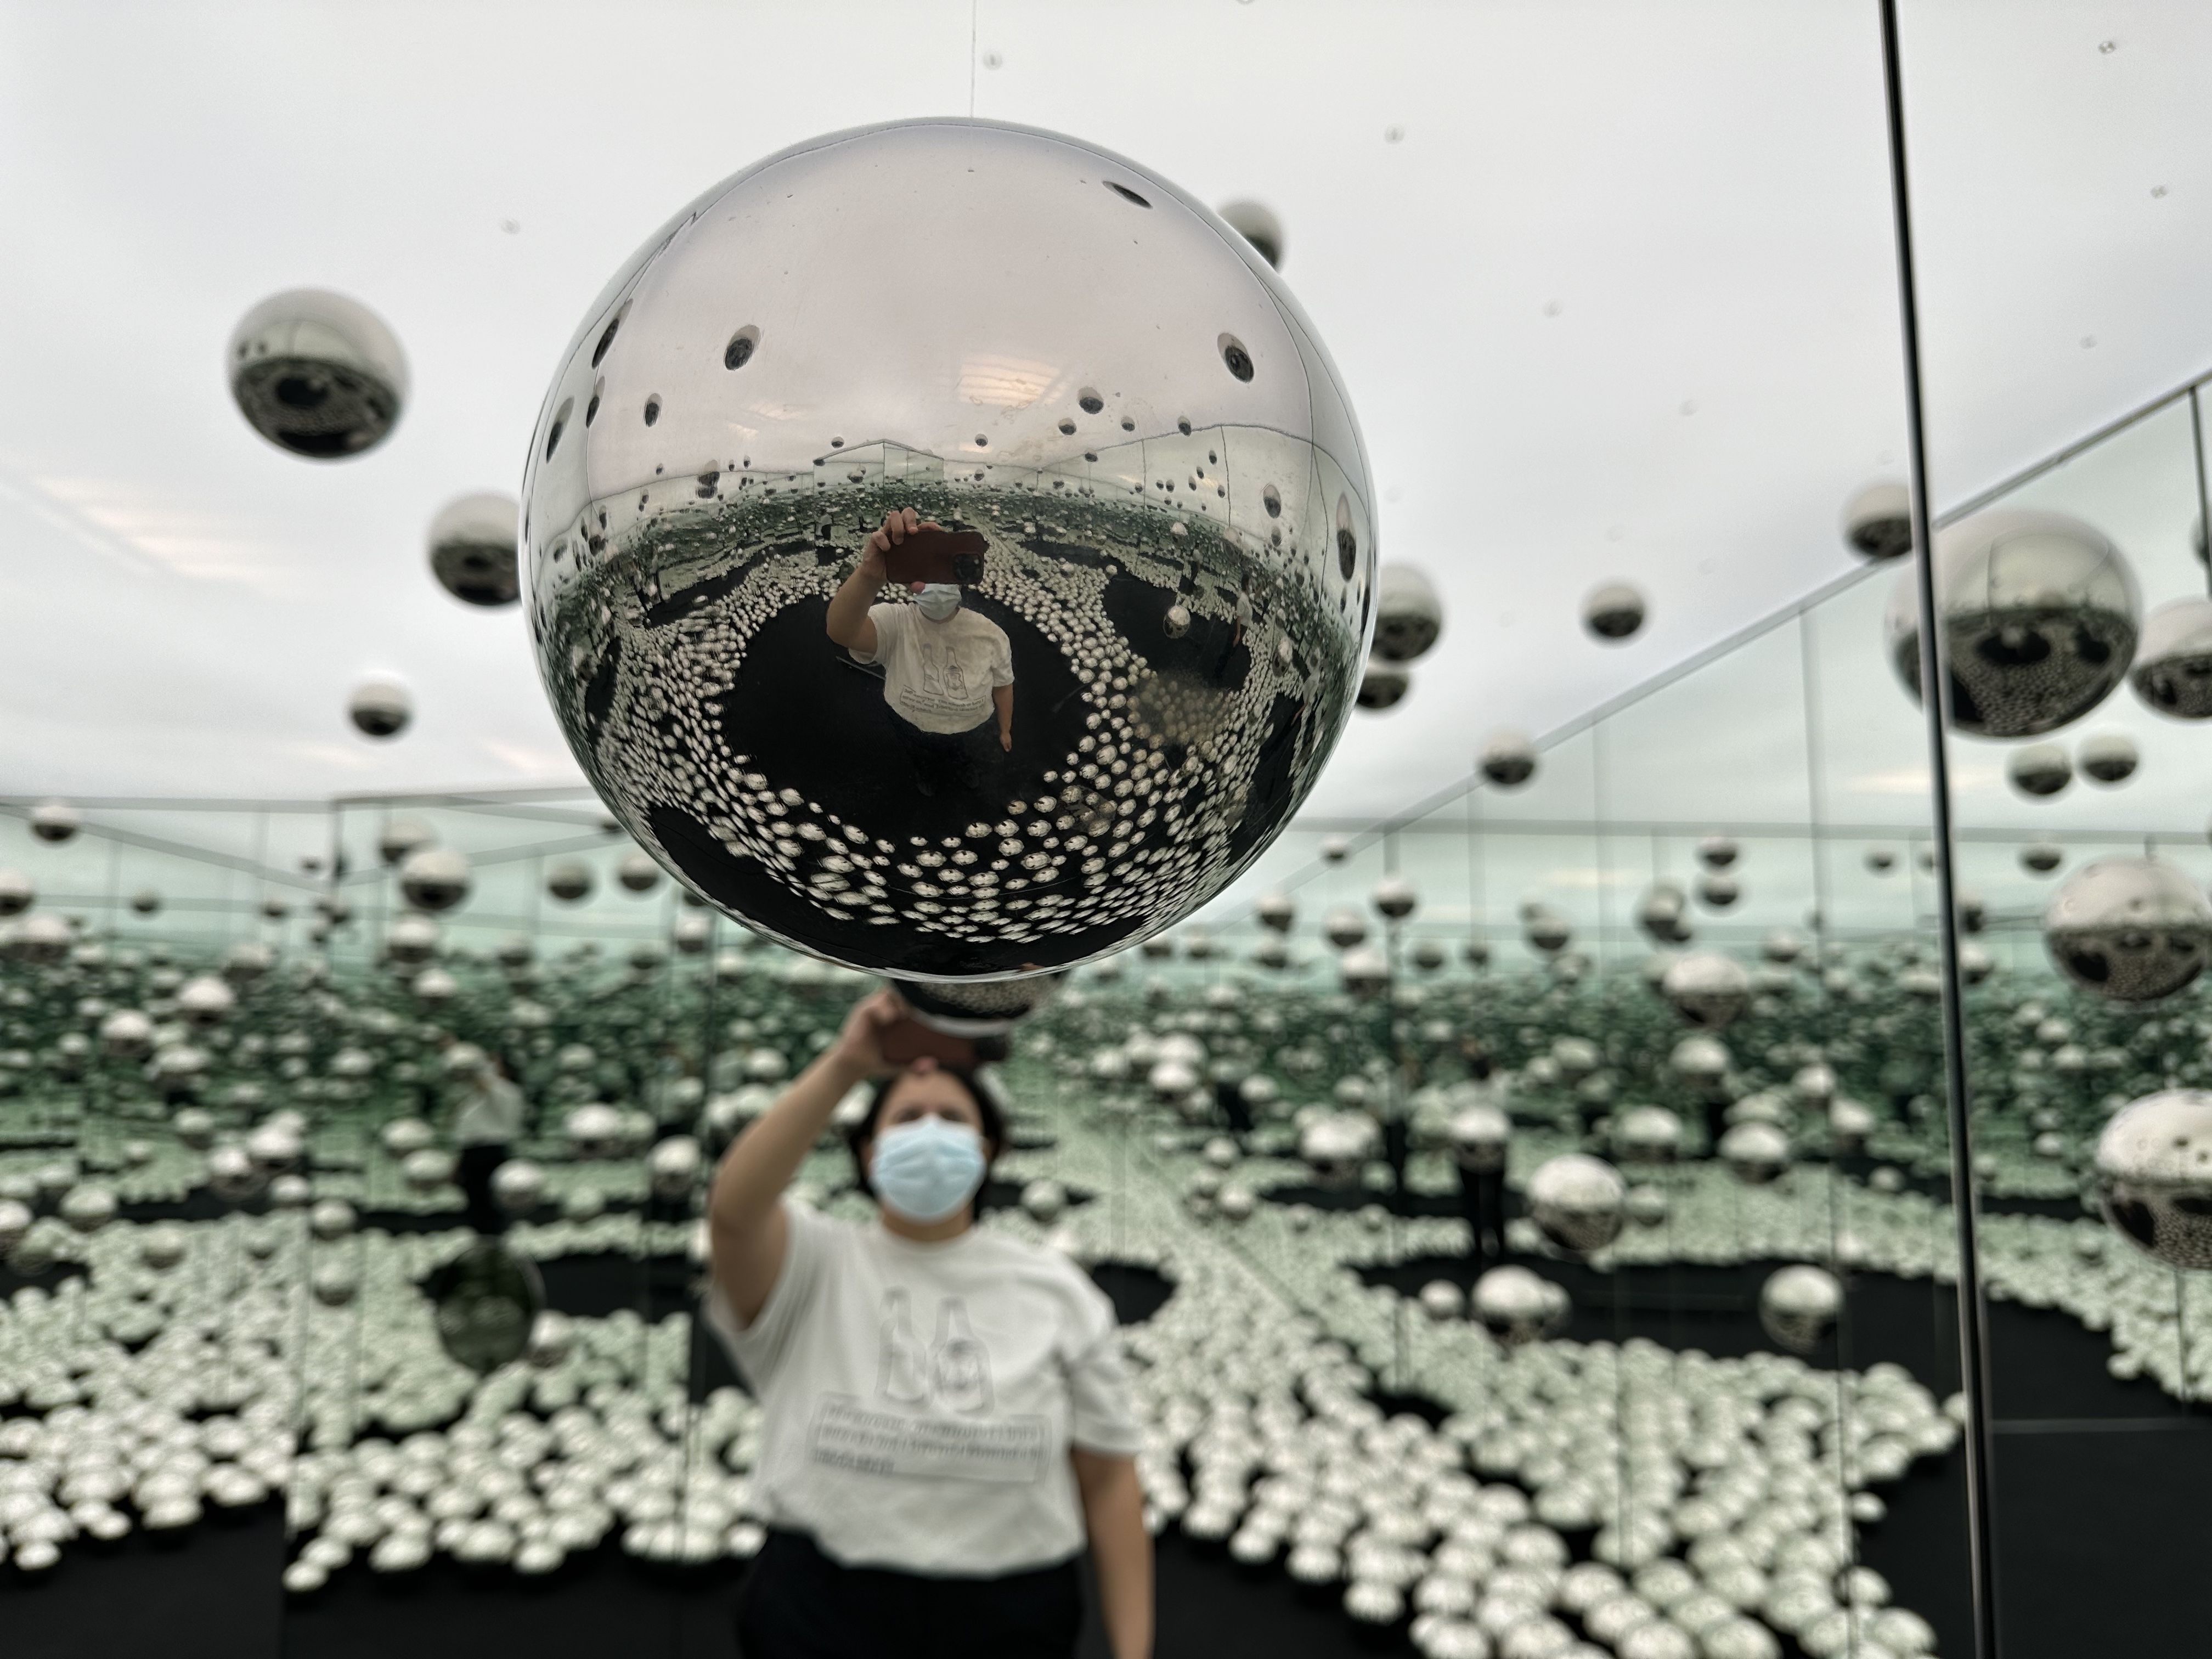 A reporter takes a photograph of a stainless steel ball in a mirrored room filled with them as part of Yayoi Kusama's "Let's Survive Forever" installation, seen at the WNDR Museum in Boston.